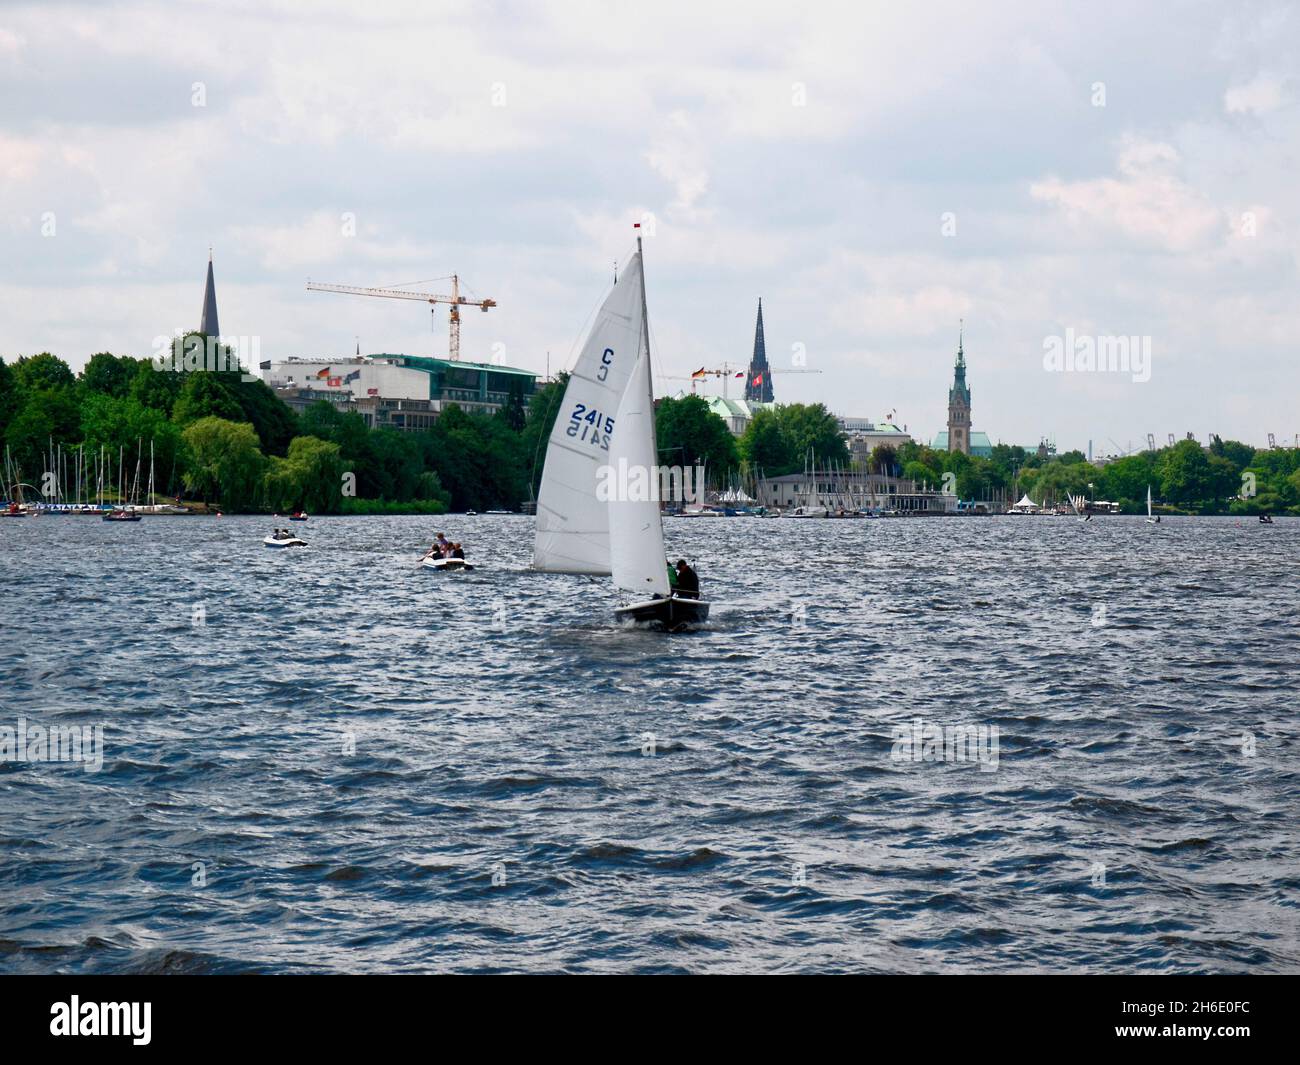 Sailors on the Aussenalster in Hamburg, Germany. Stock Photo